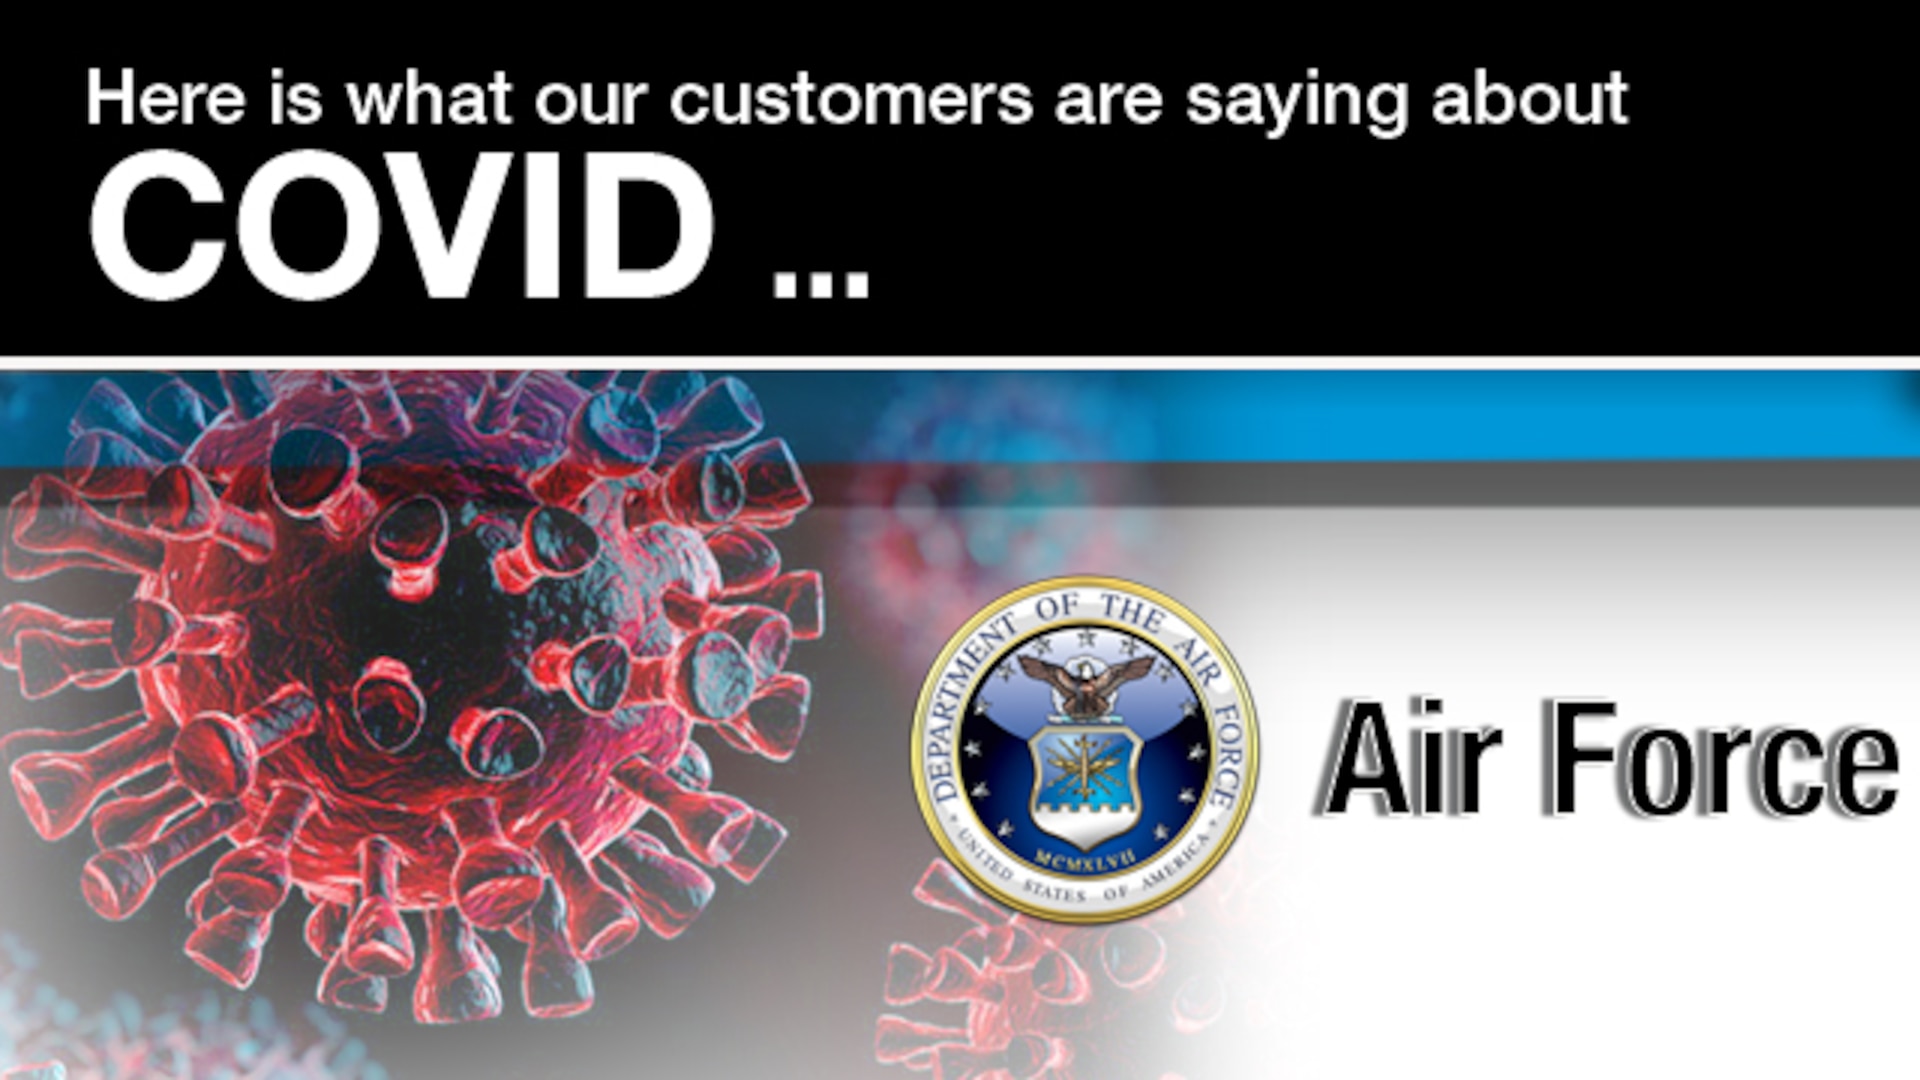 The global pandemic has required constant, consistent and engaging communication products to be developed to educate the government workforce about the dangers of COVID and the necessity to get vaccinated. As a result, many of the Defense Contract Management Agency’s customers have created compelling and unique products for their workforce. Today, we focus on the Air Force.